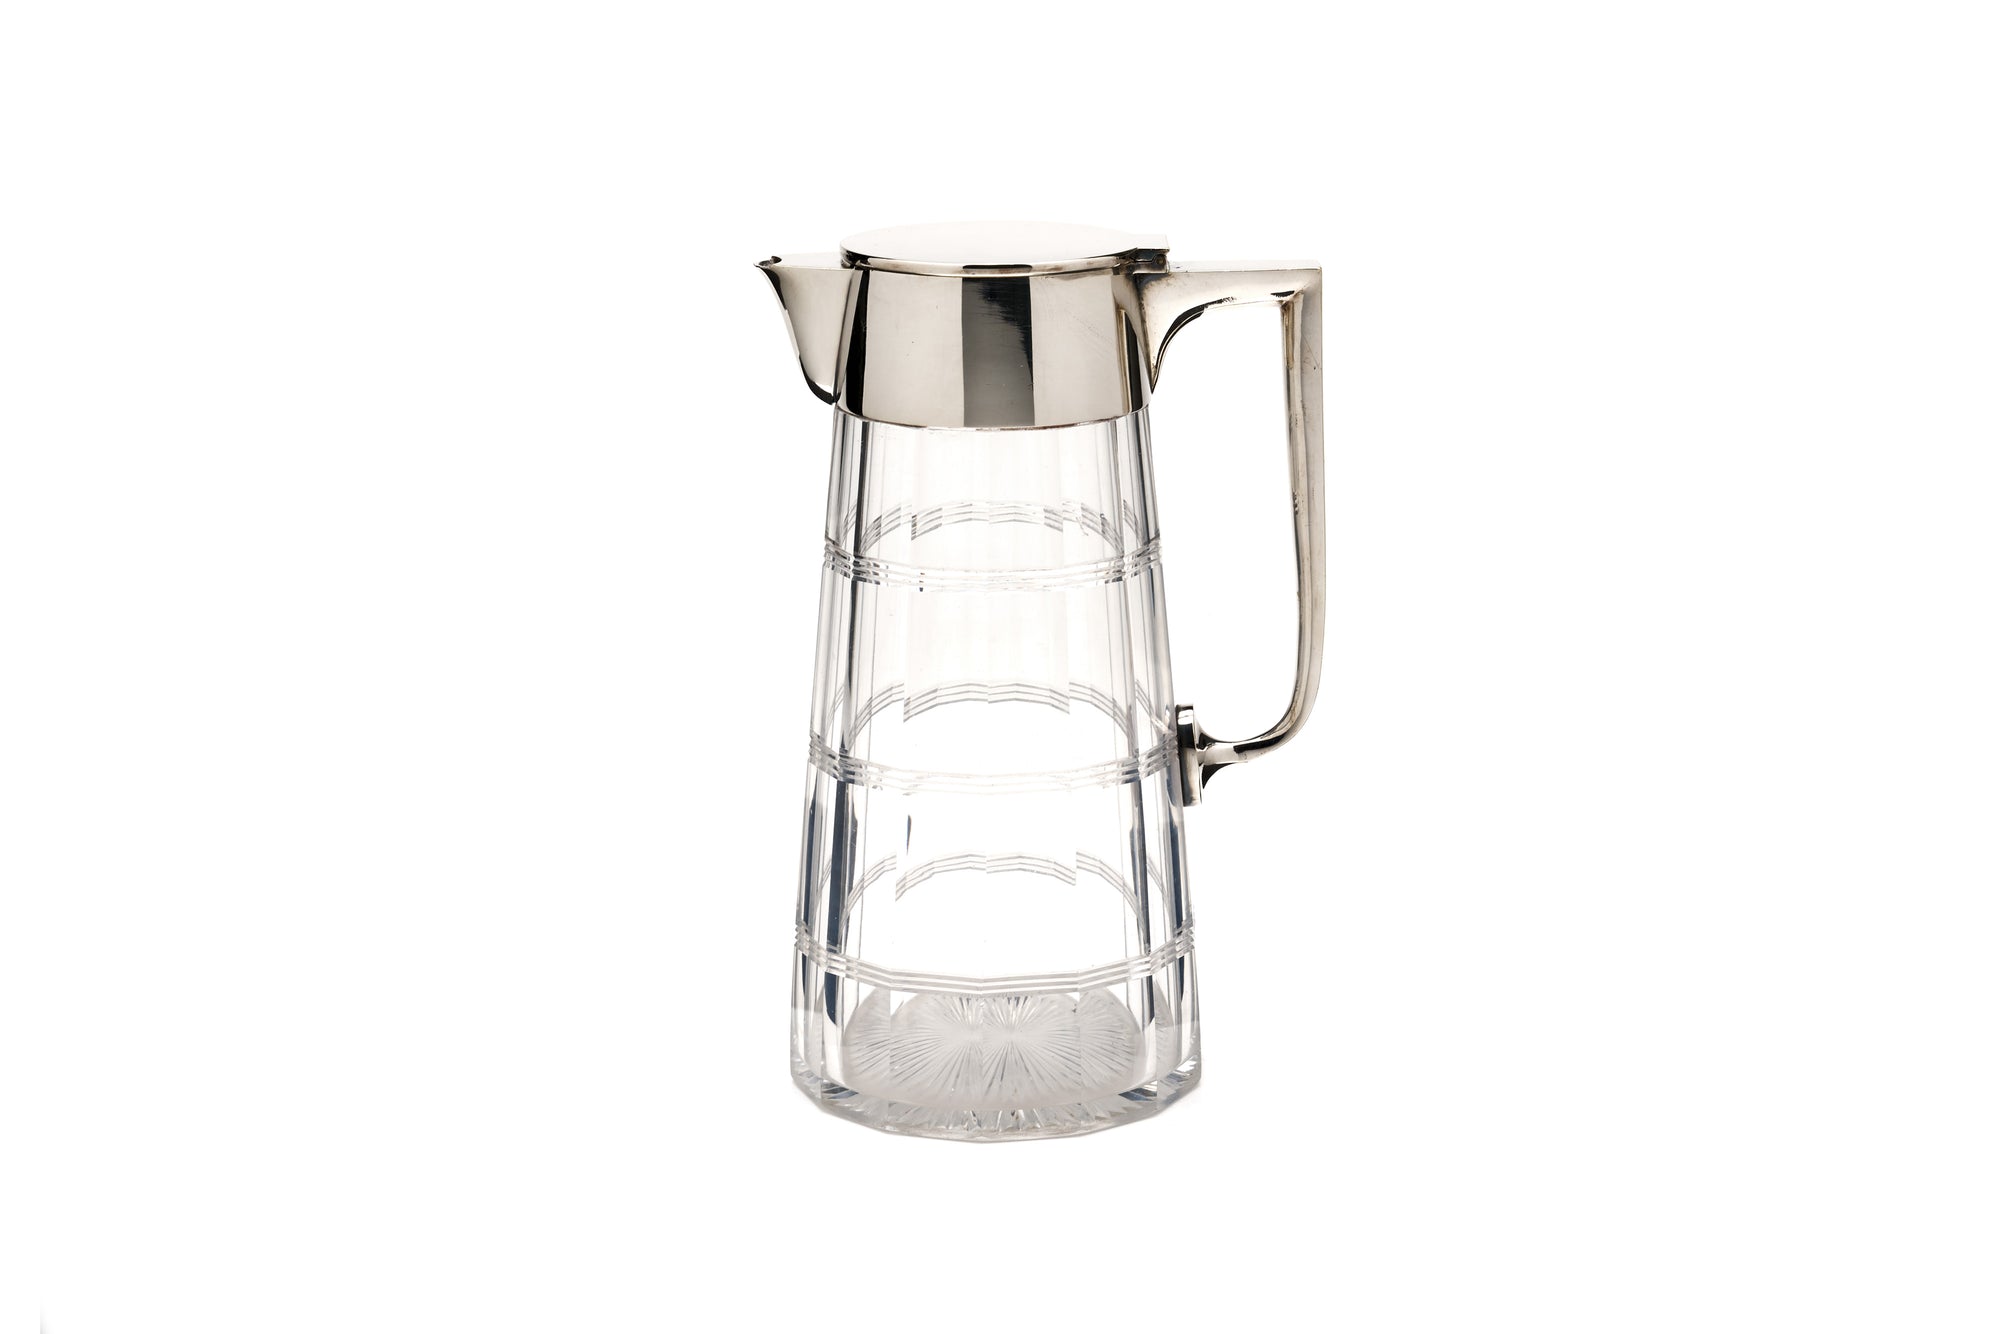 Silver & Glass Pitcher